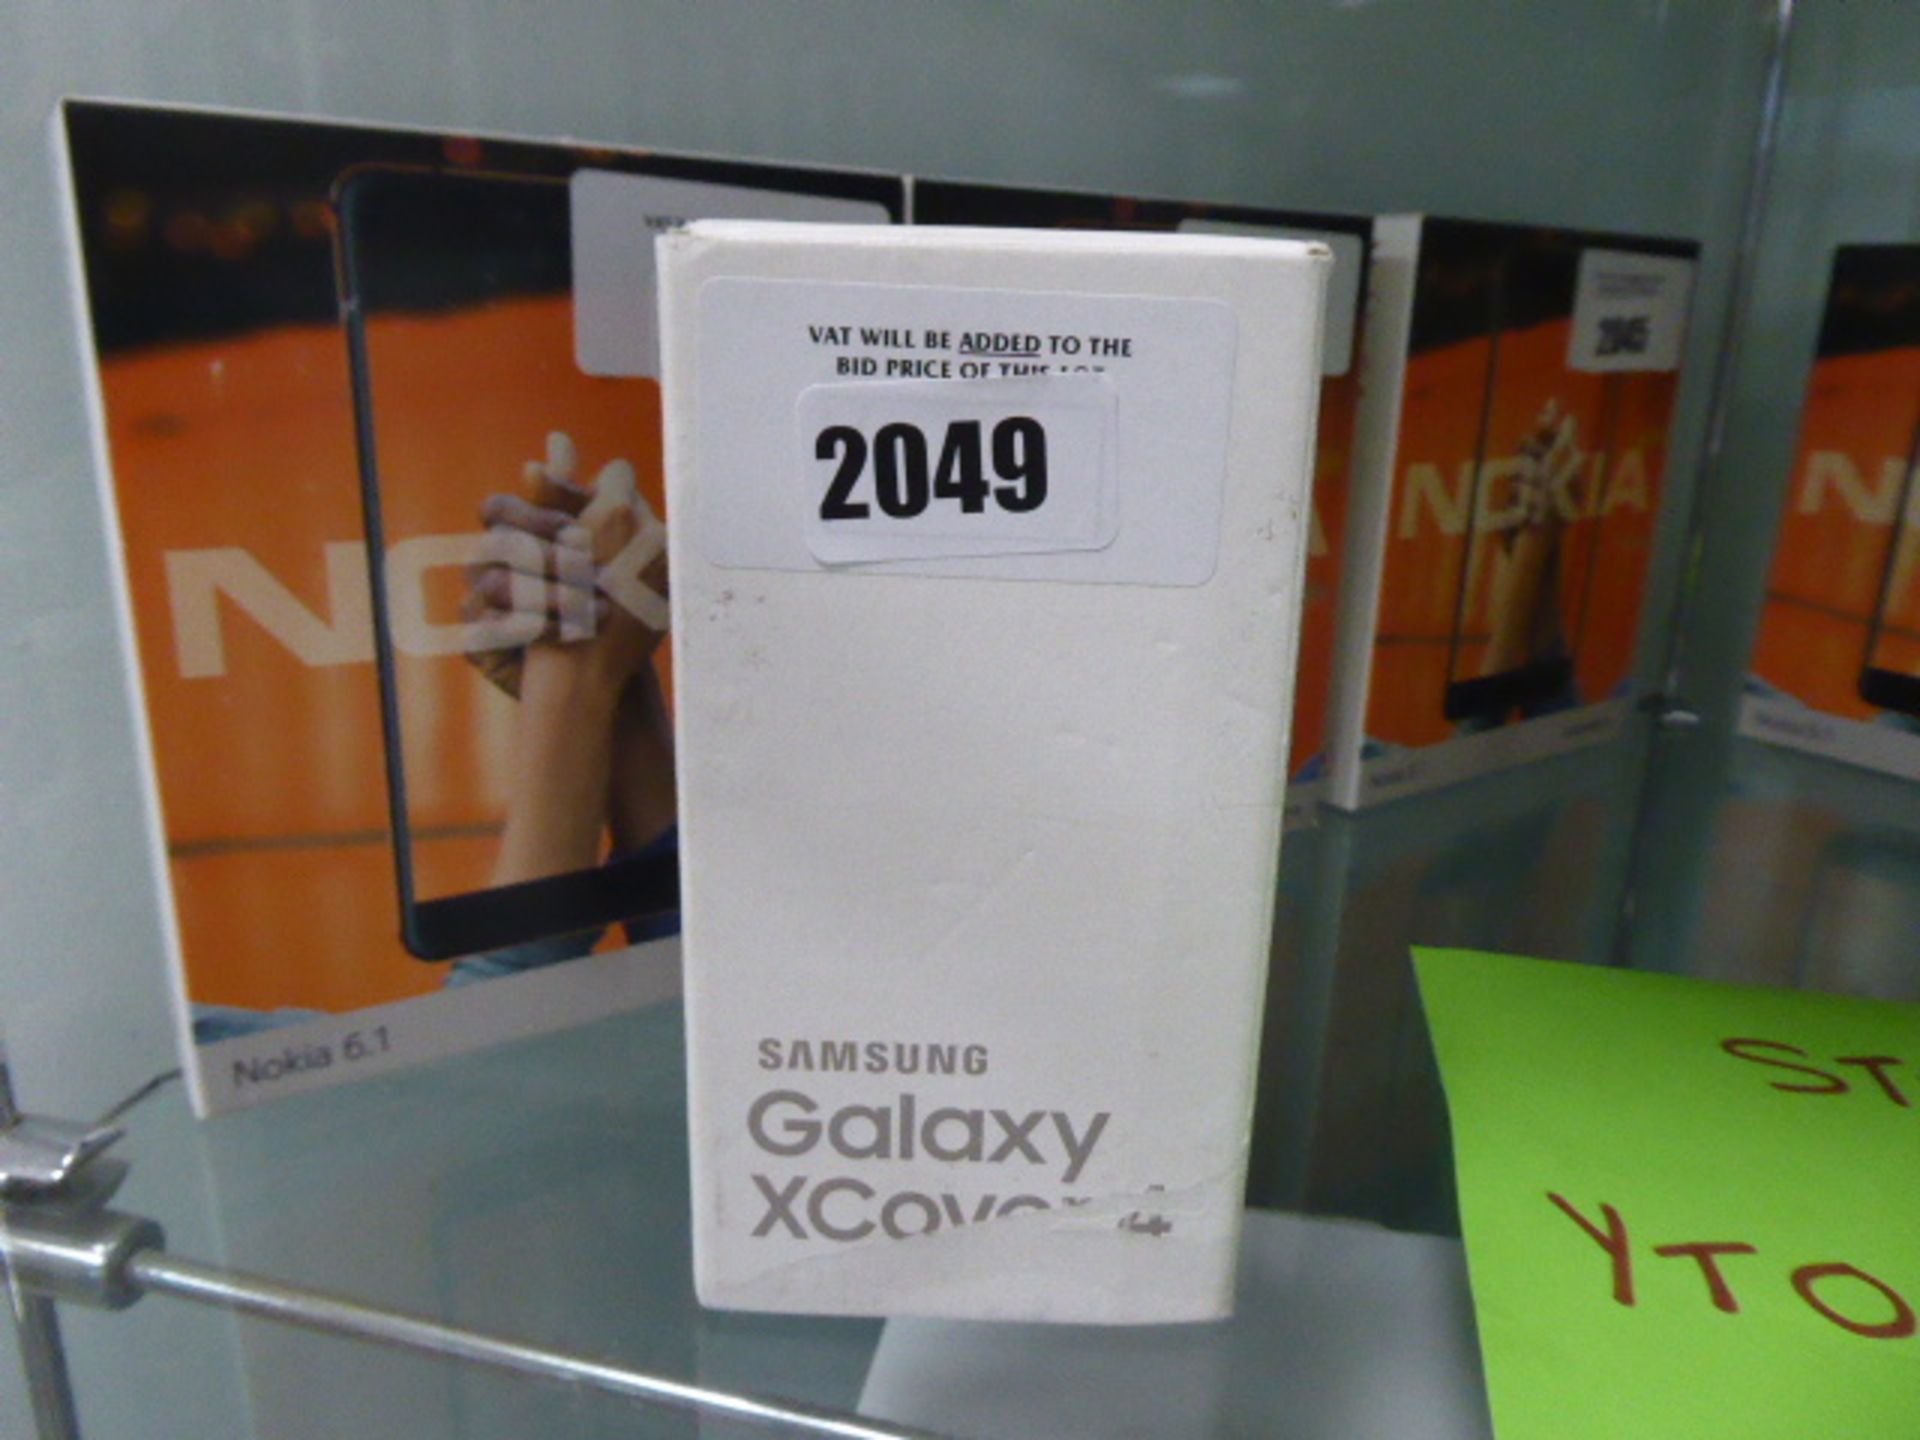 A Samsung Galaxy X cover 4 mobile with box